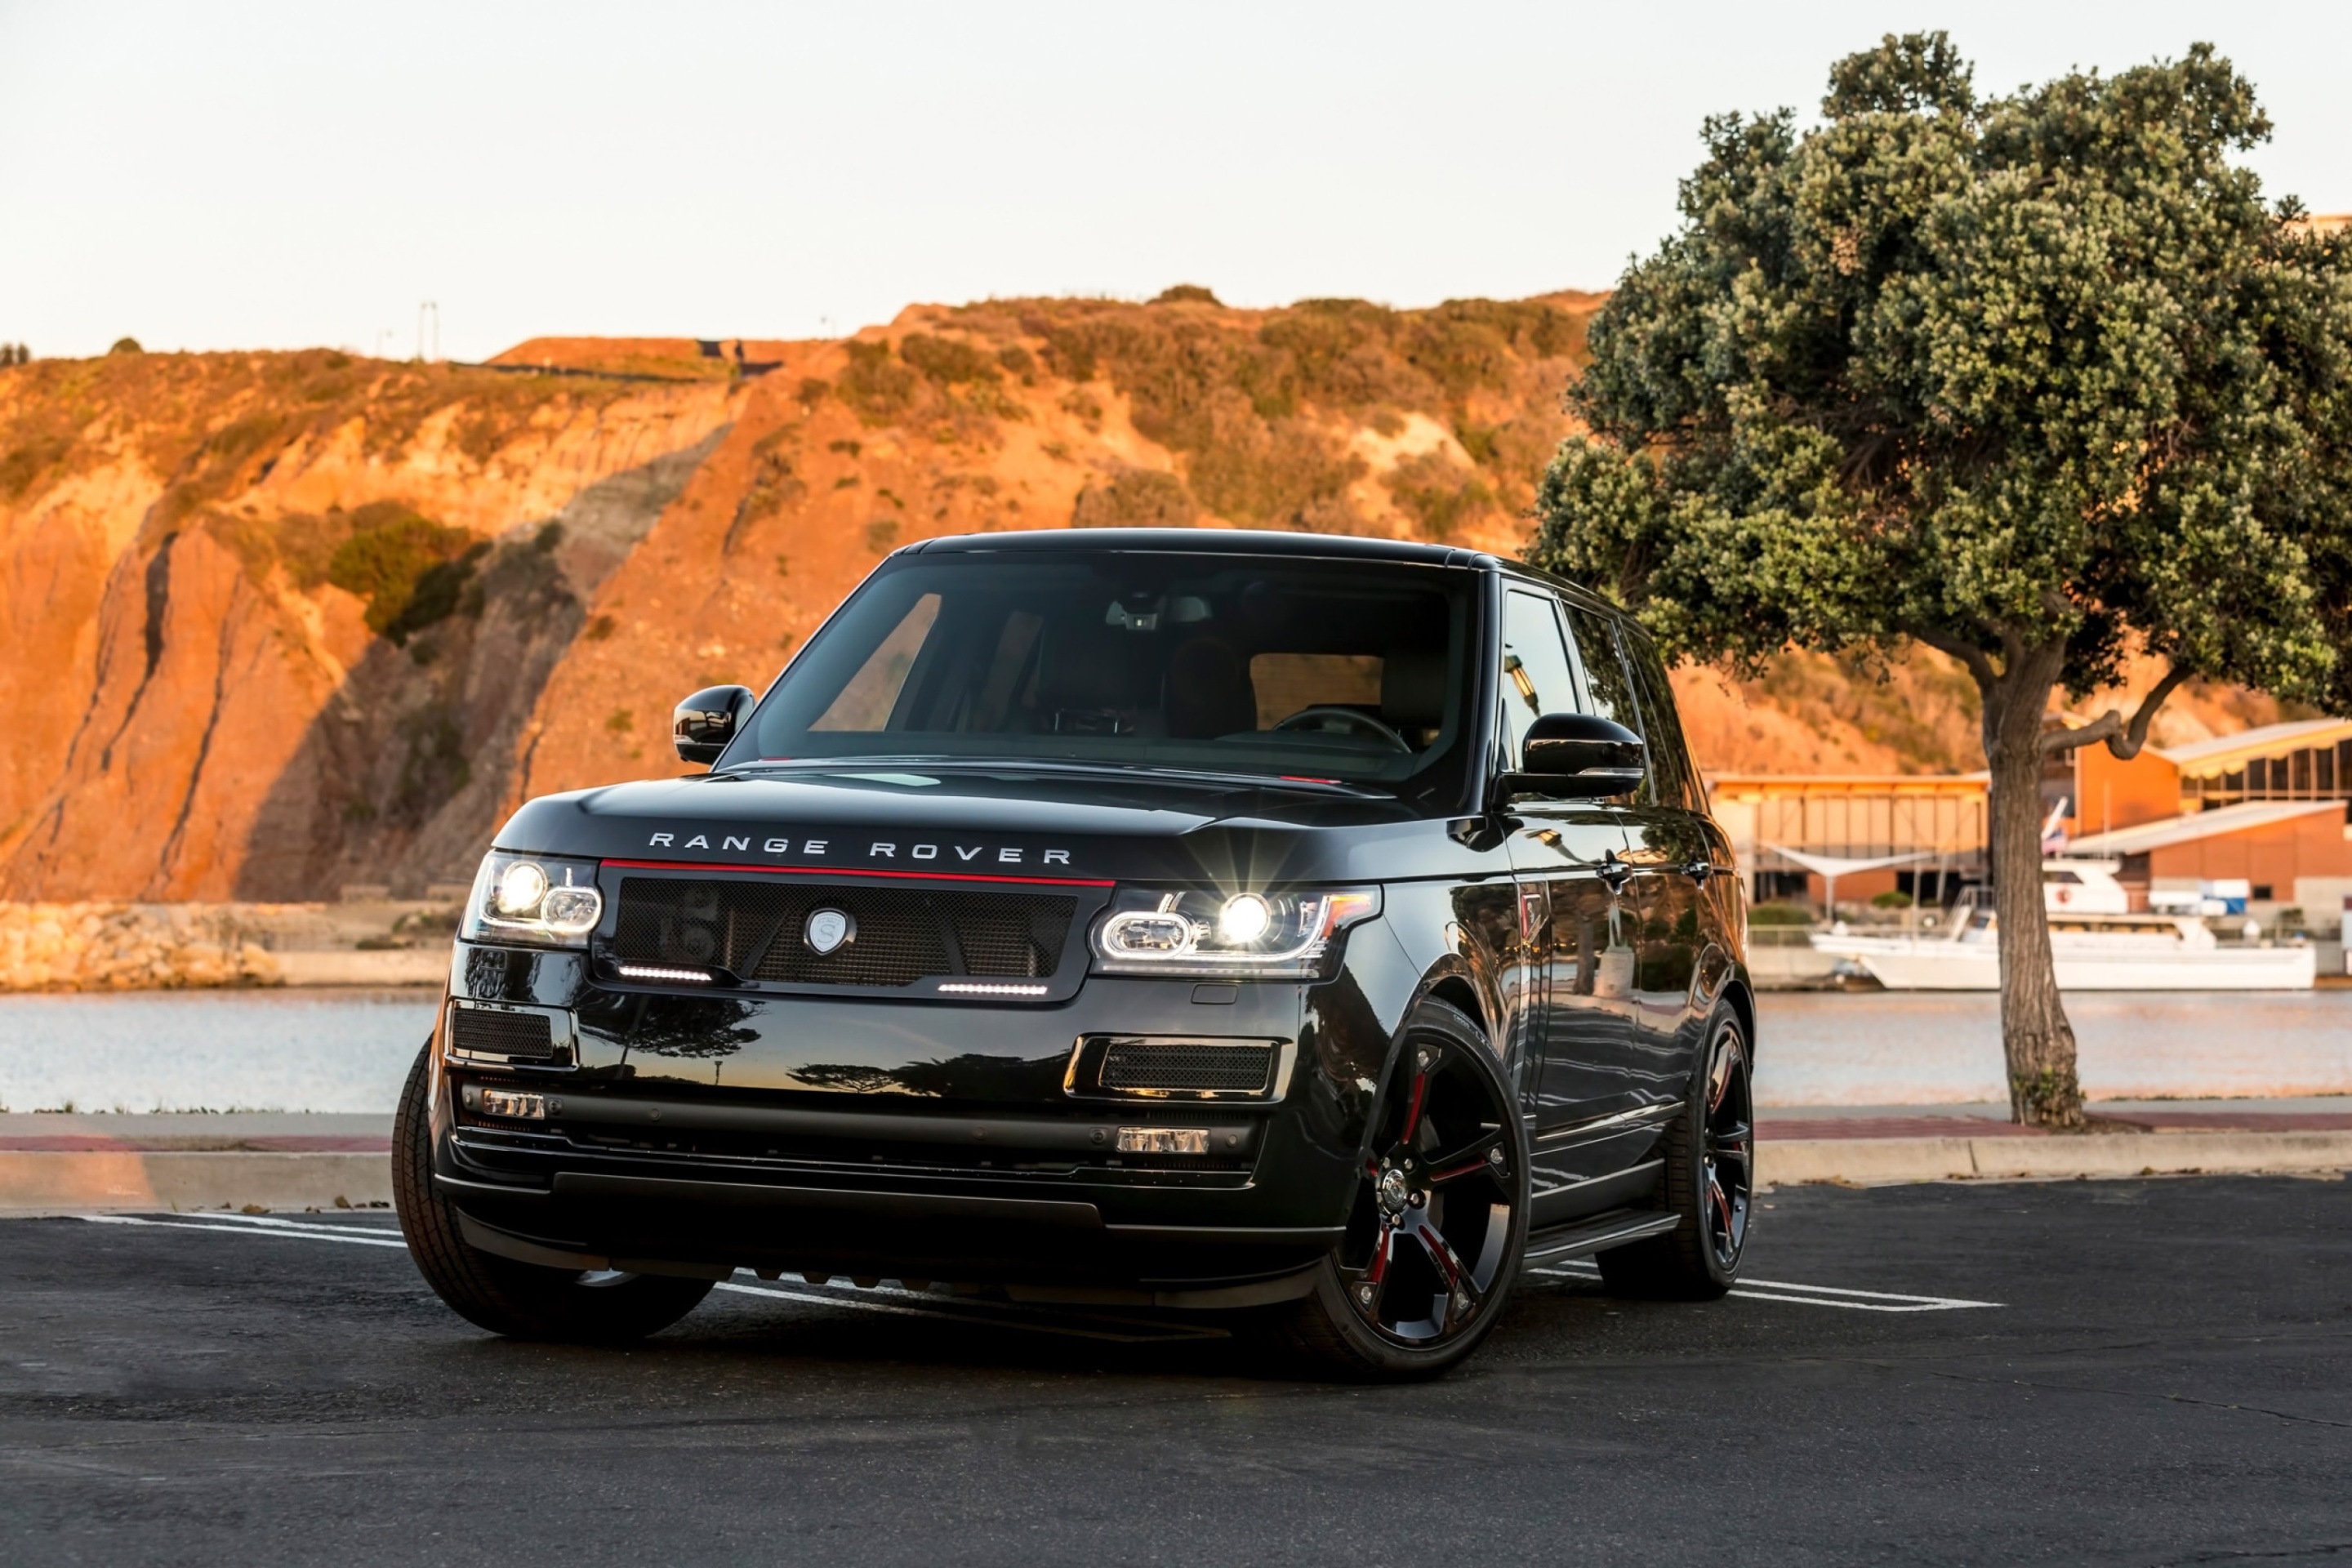 Range Rover STRUT with Grille Package wallpaper 2880x1920